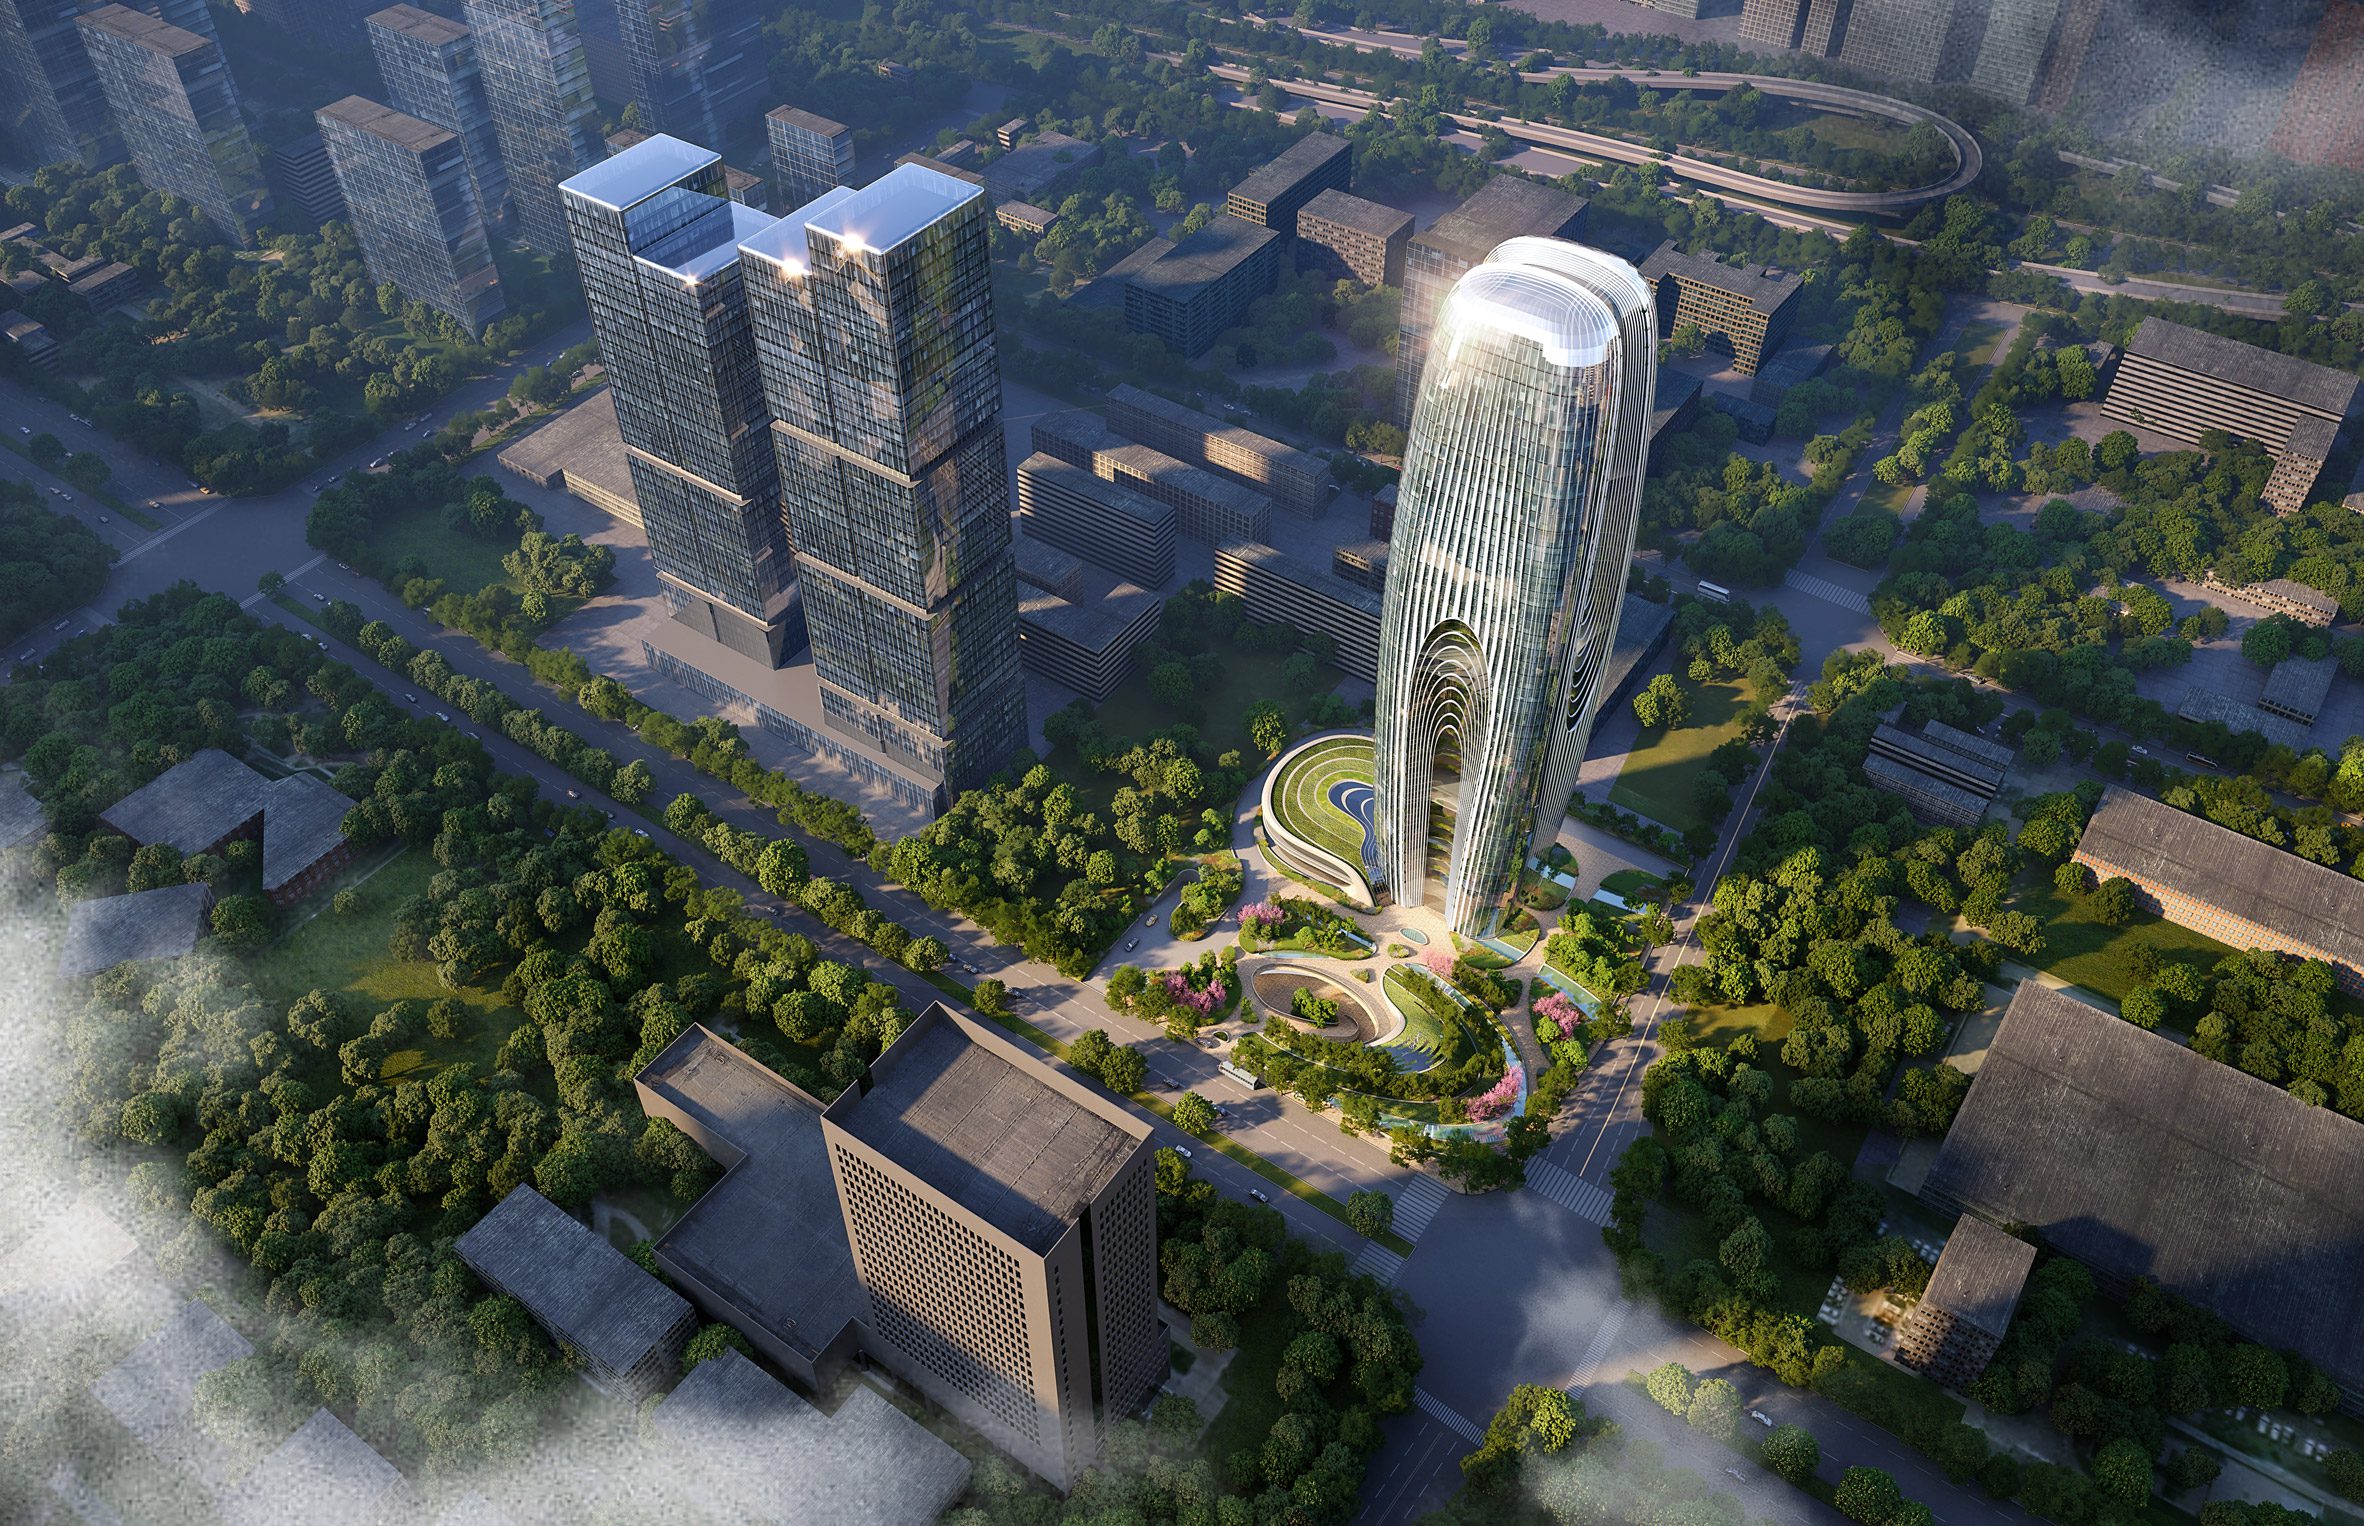 Render of the mixed-use tower